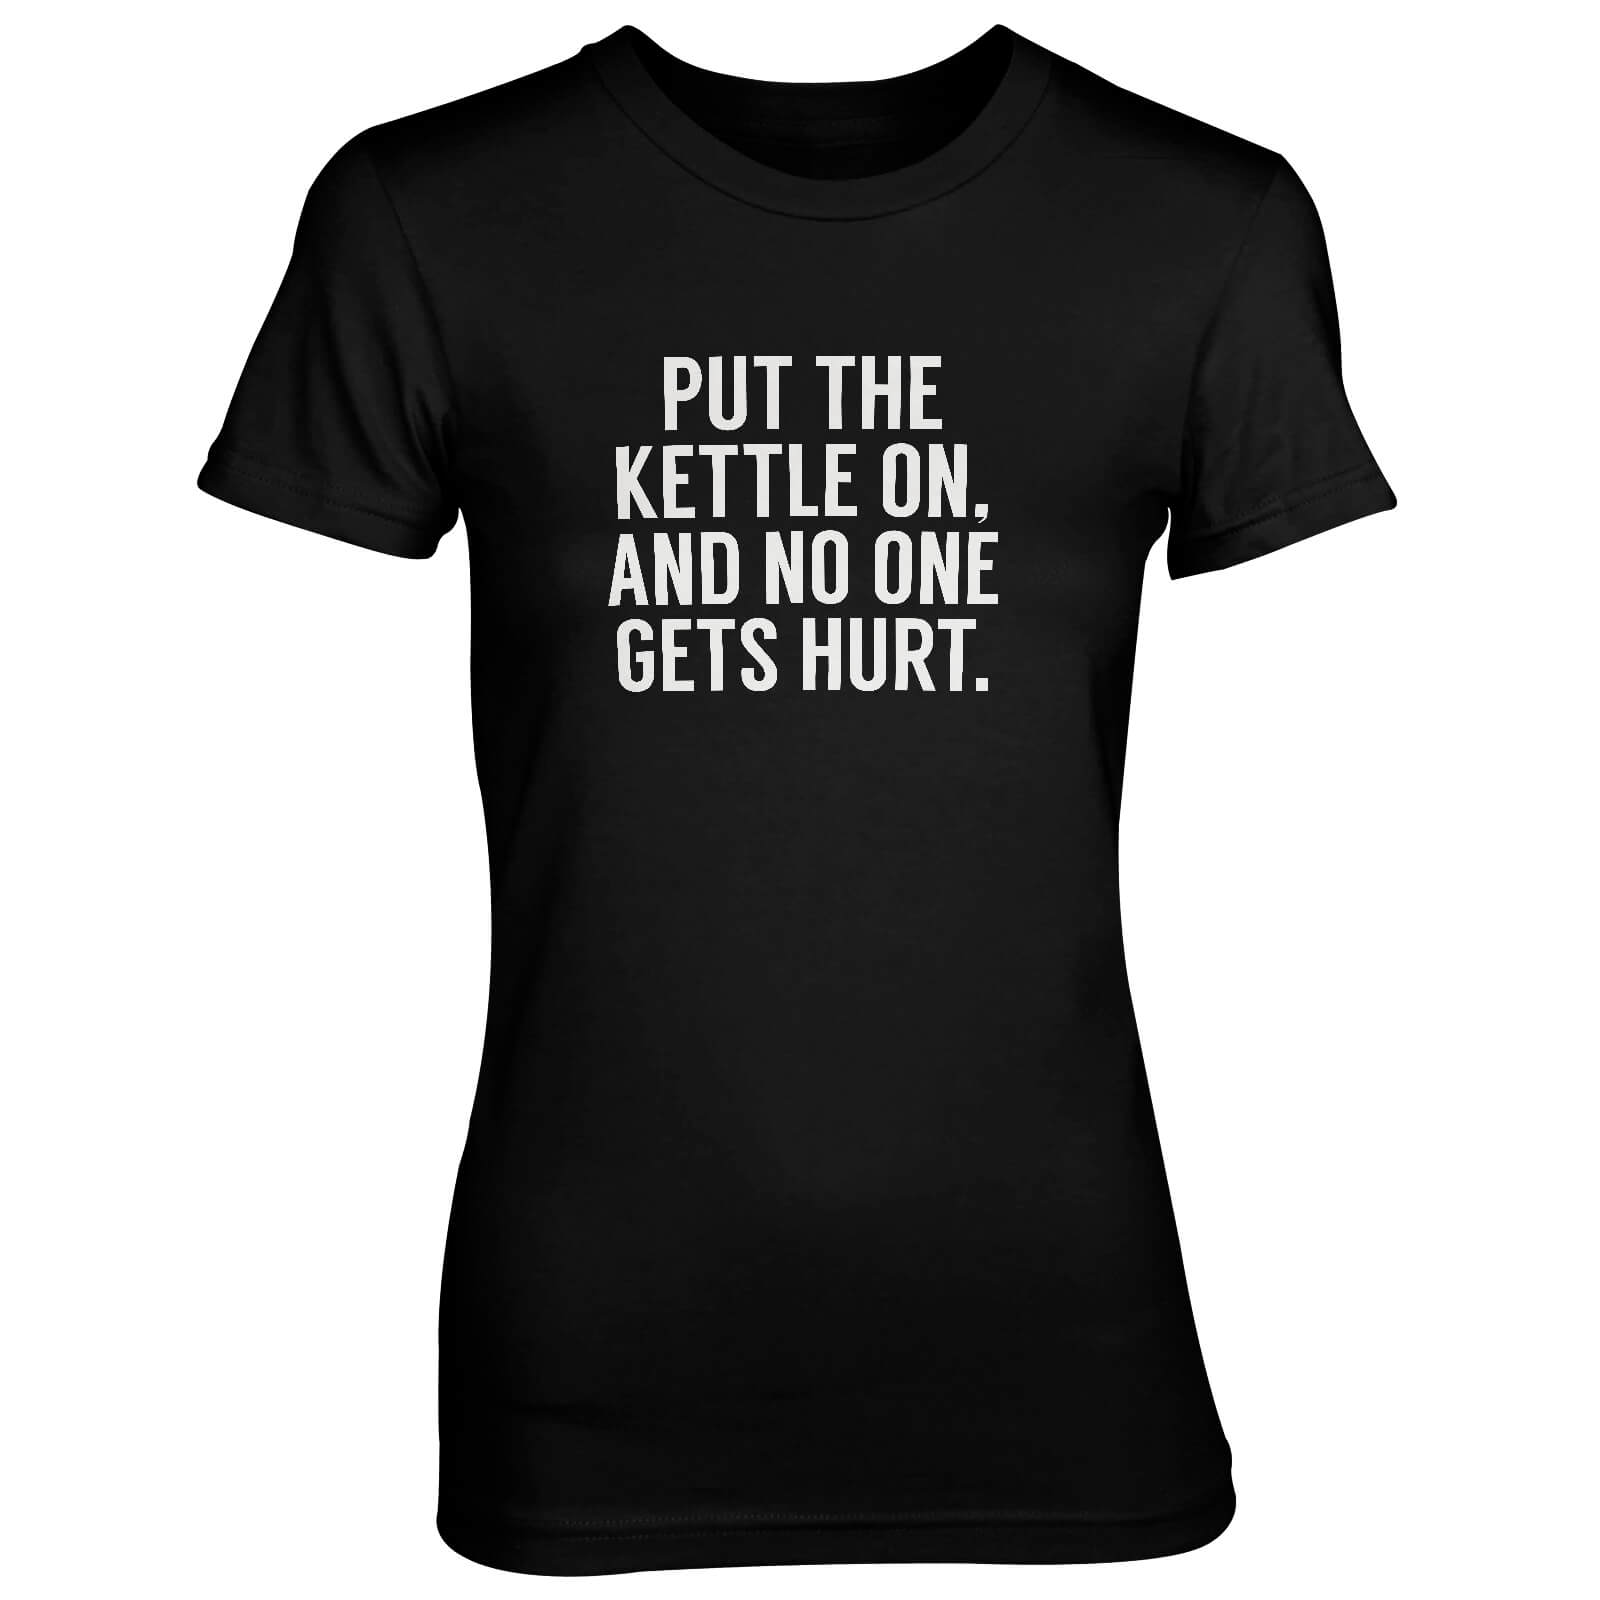 Put The Kettle On And No One Gets Hurt Women's Black T-Shirt - S - Black